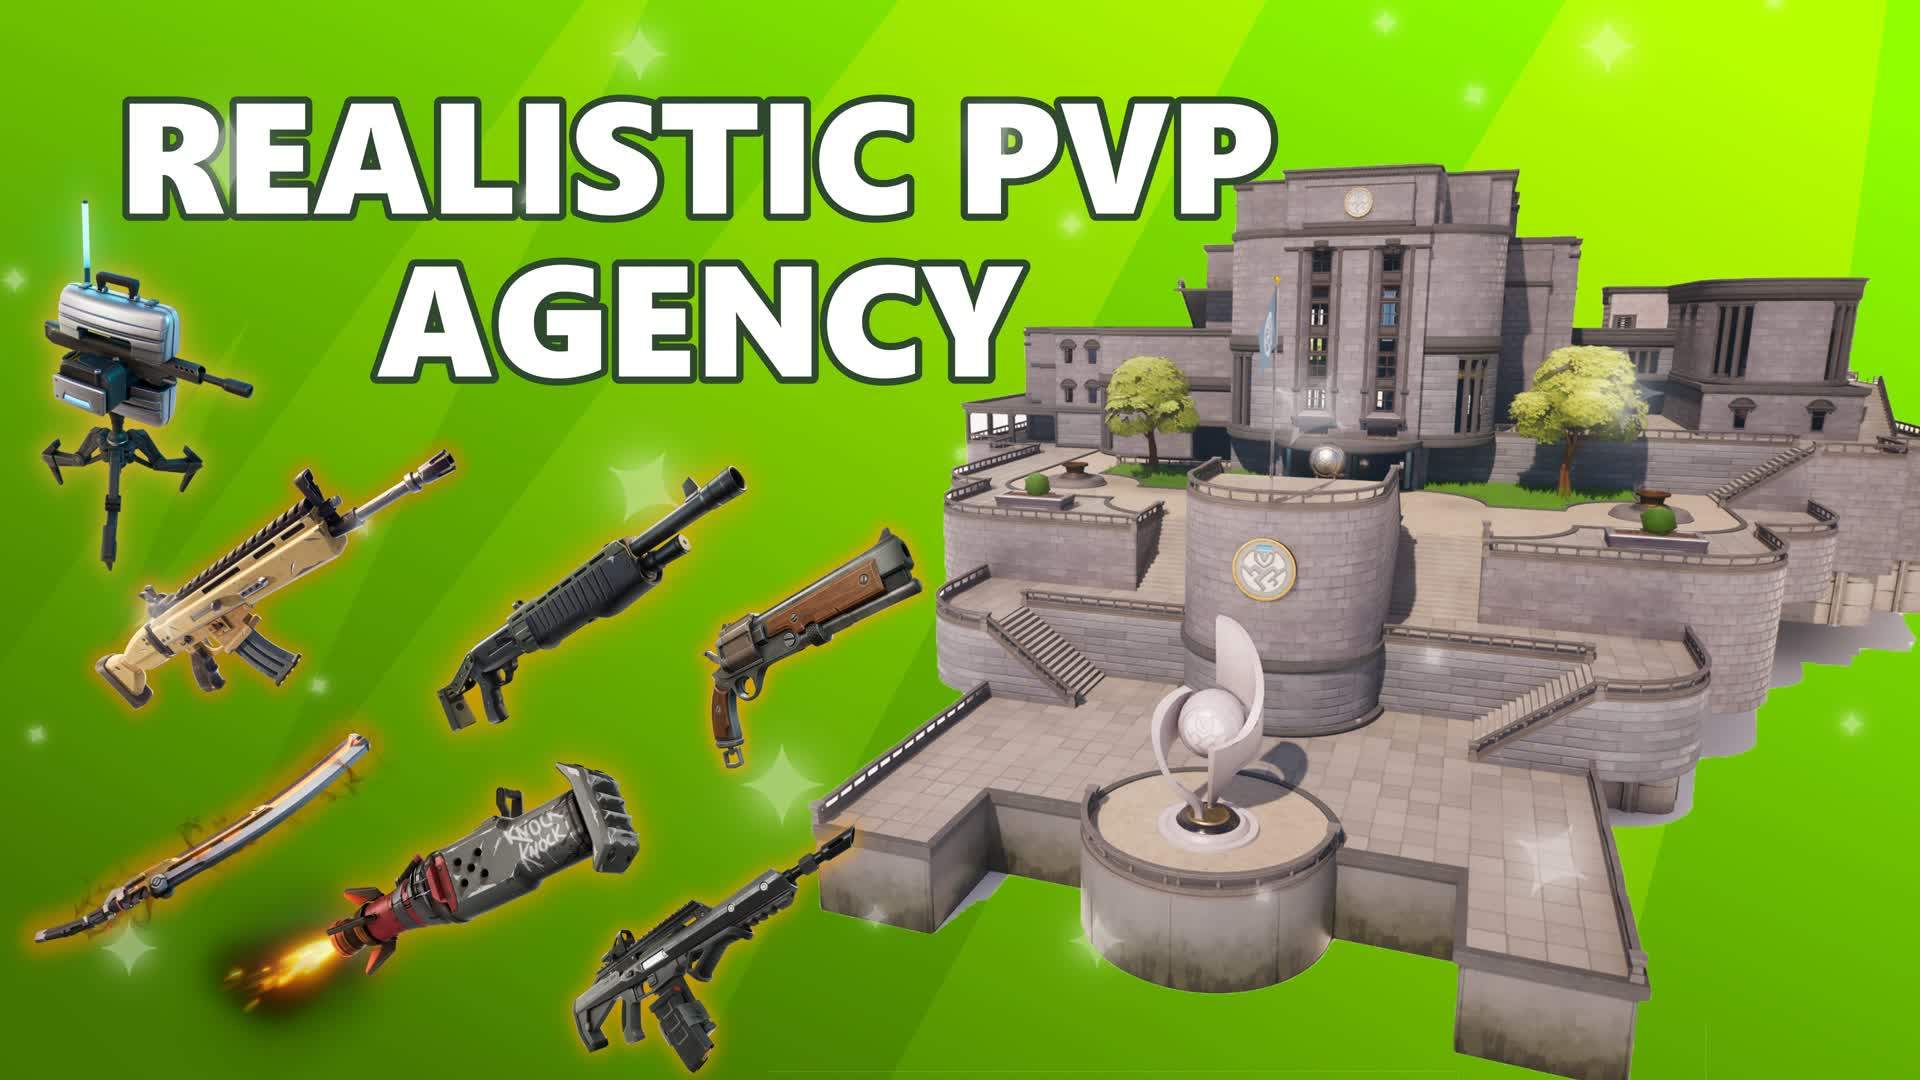 REALISTIC PVP - THE AGENCY